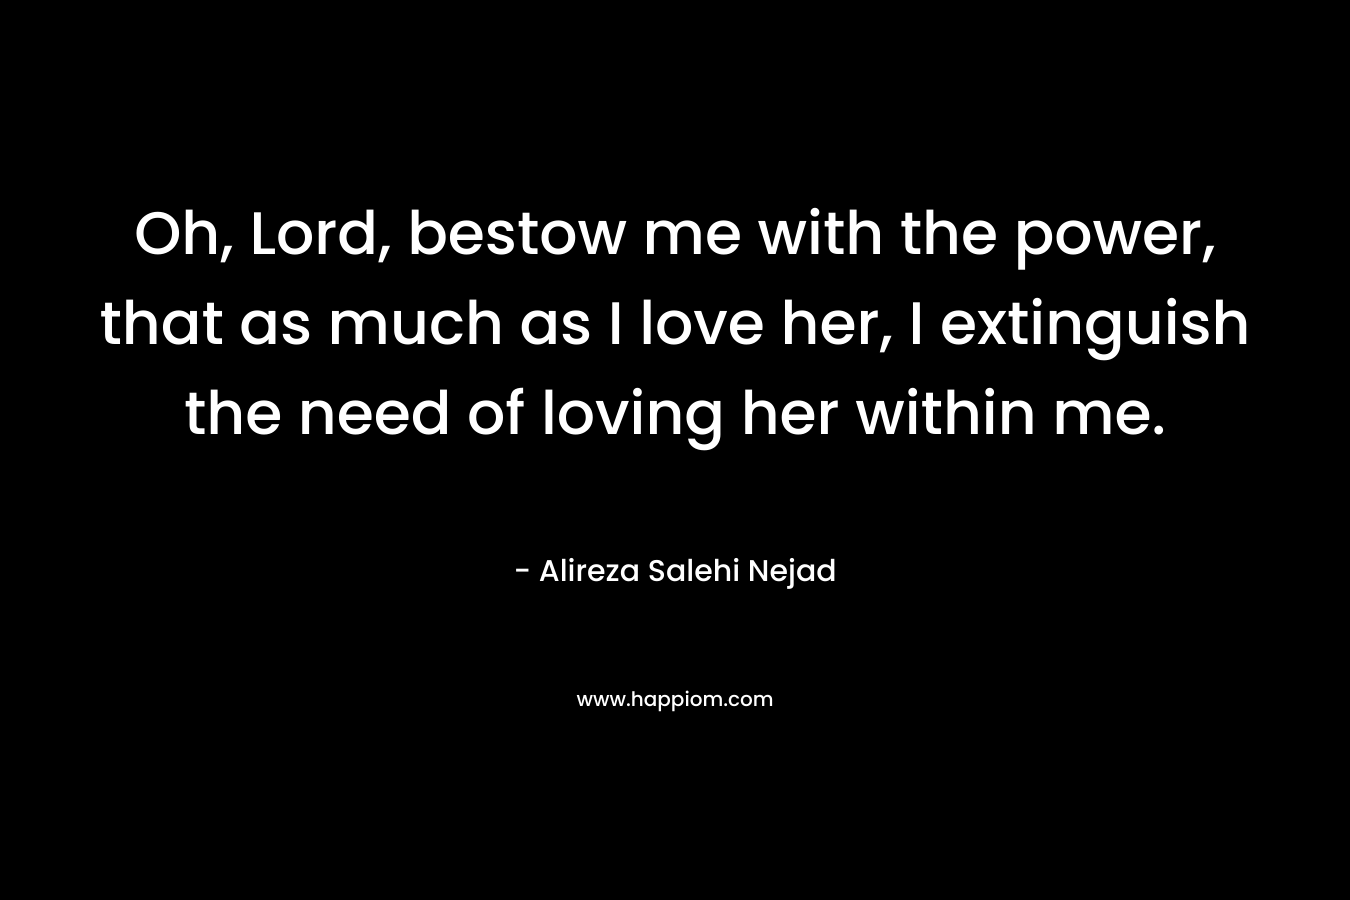 Oh, Lord, bestow me with the power, that as much as I love her, I extinguish the need of loving her within me.